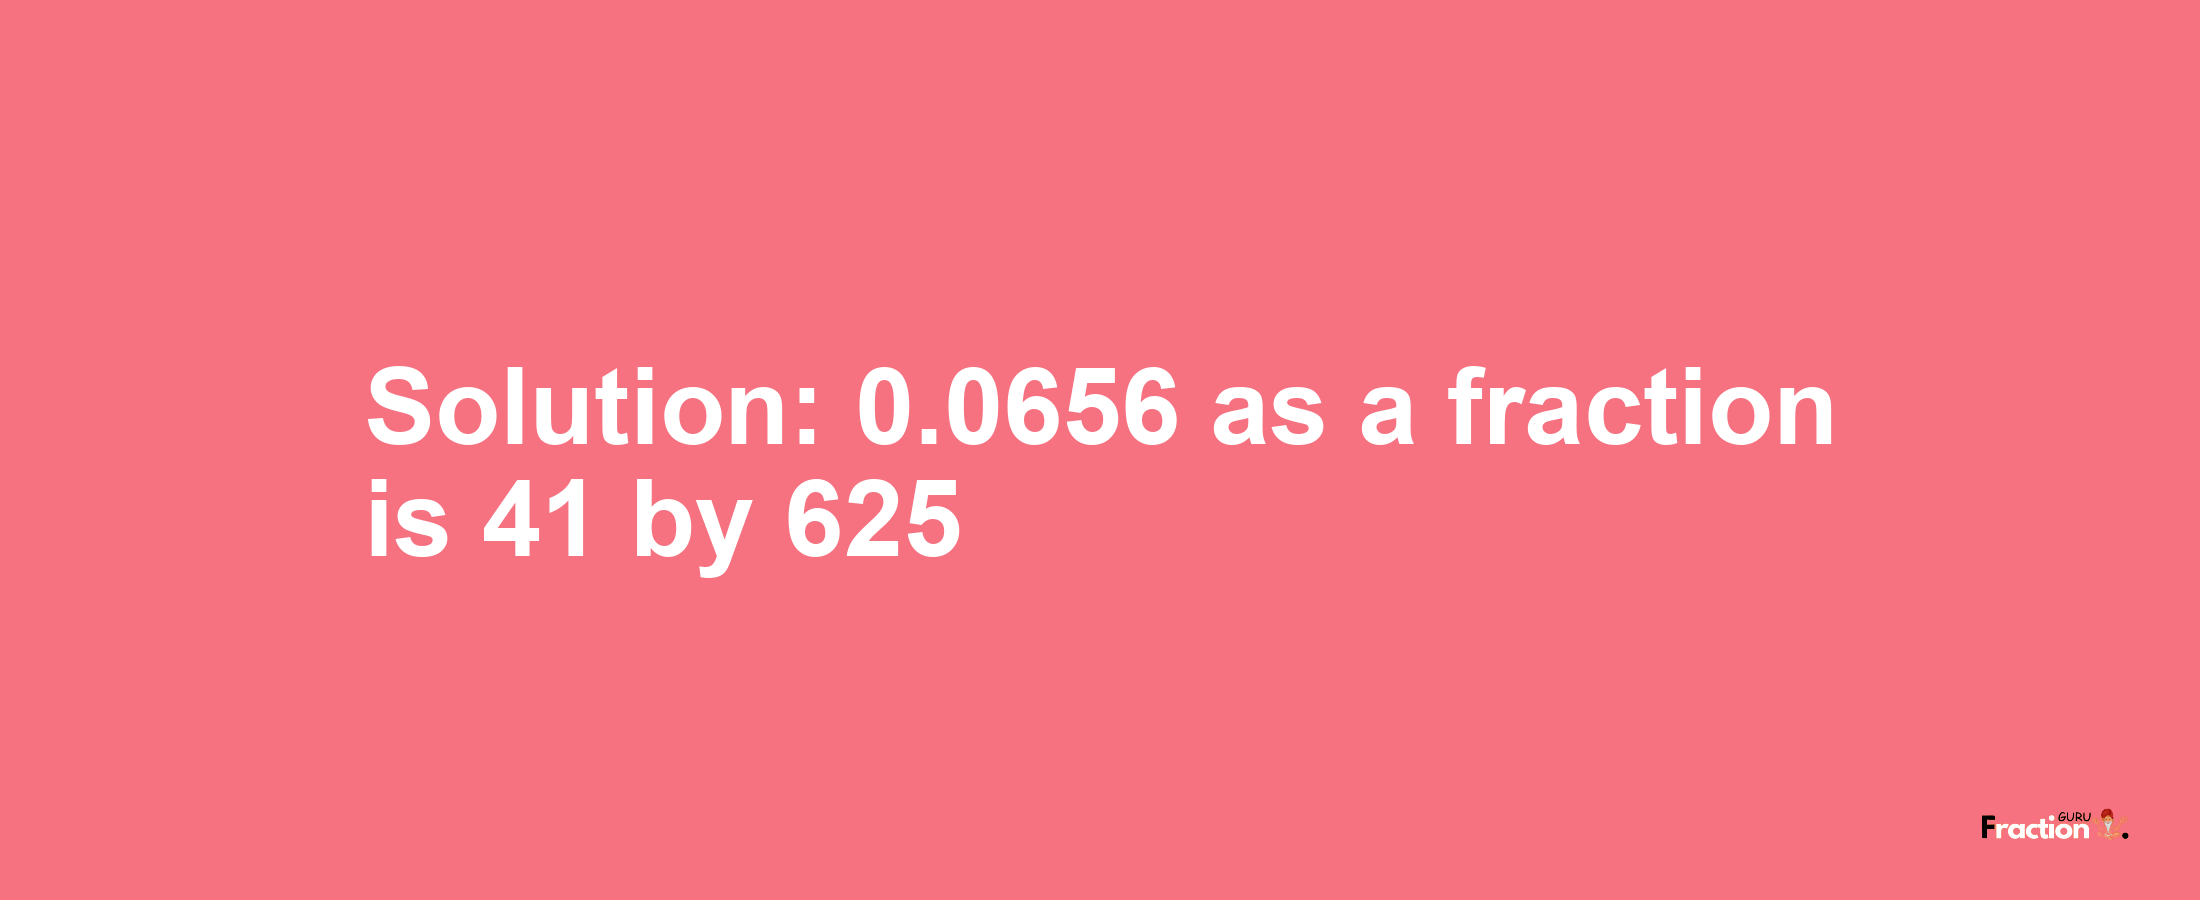 Solution:0.0656 as a fraction is 41/625